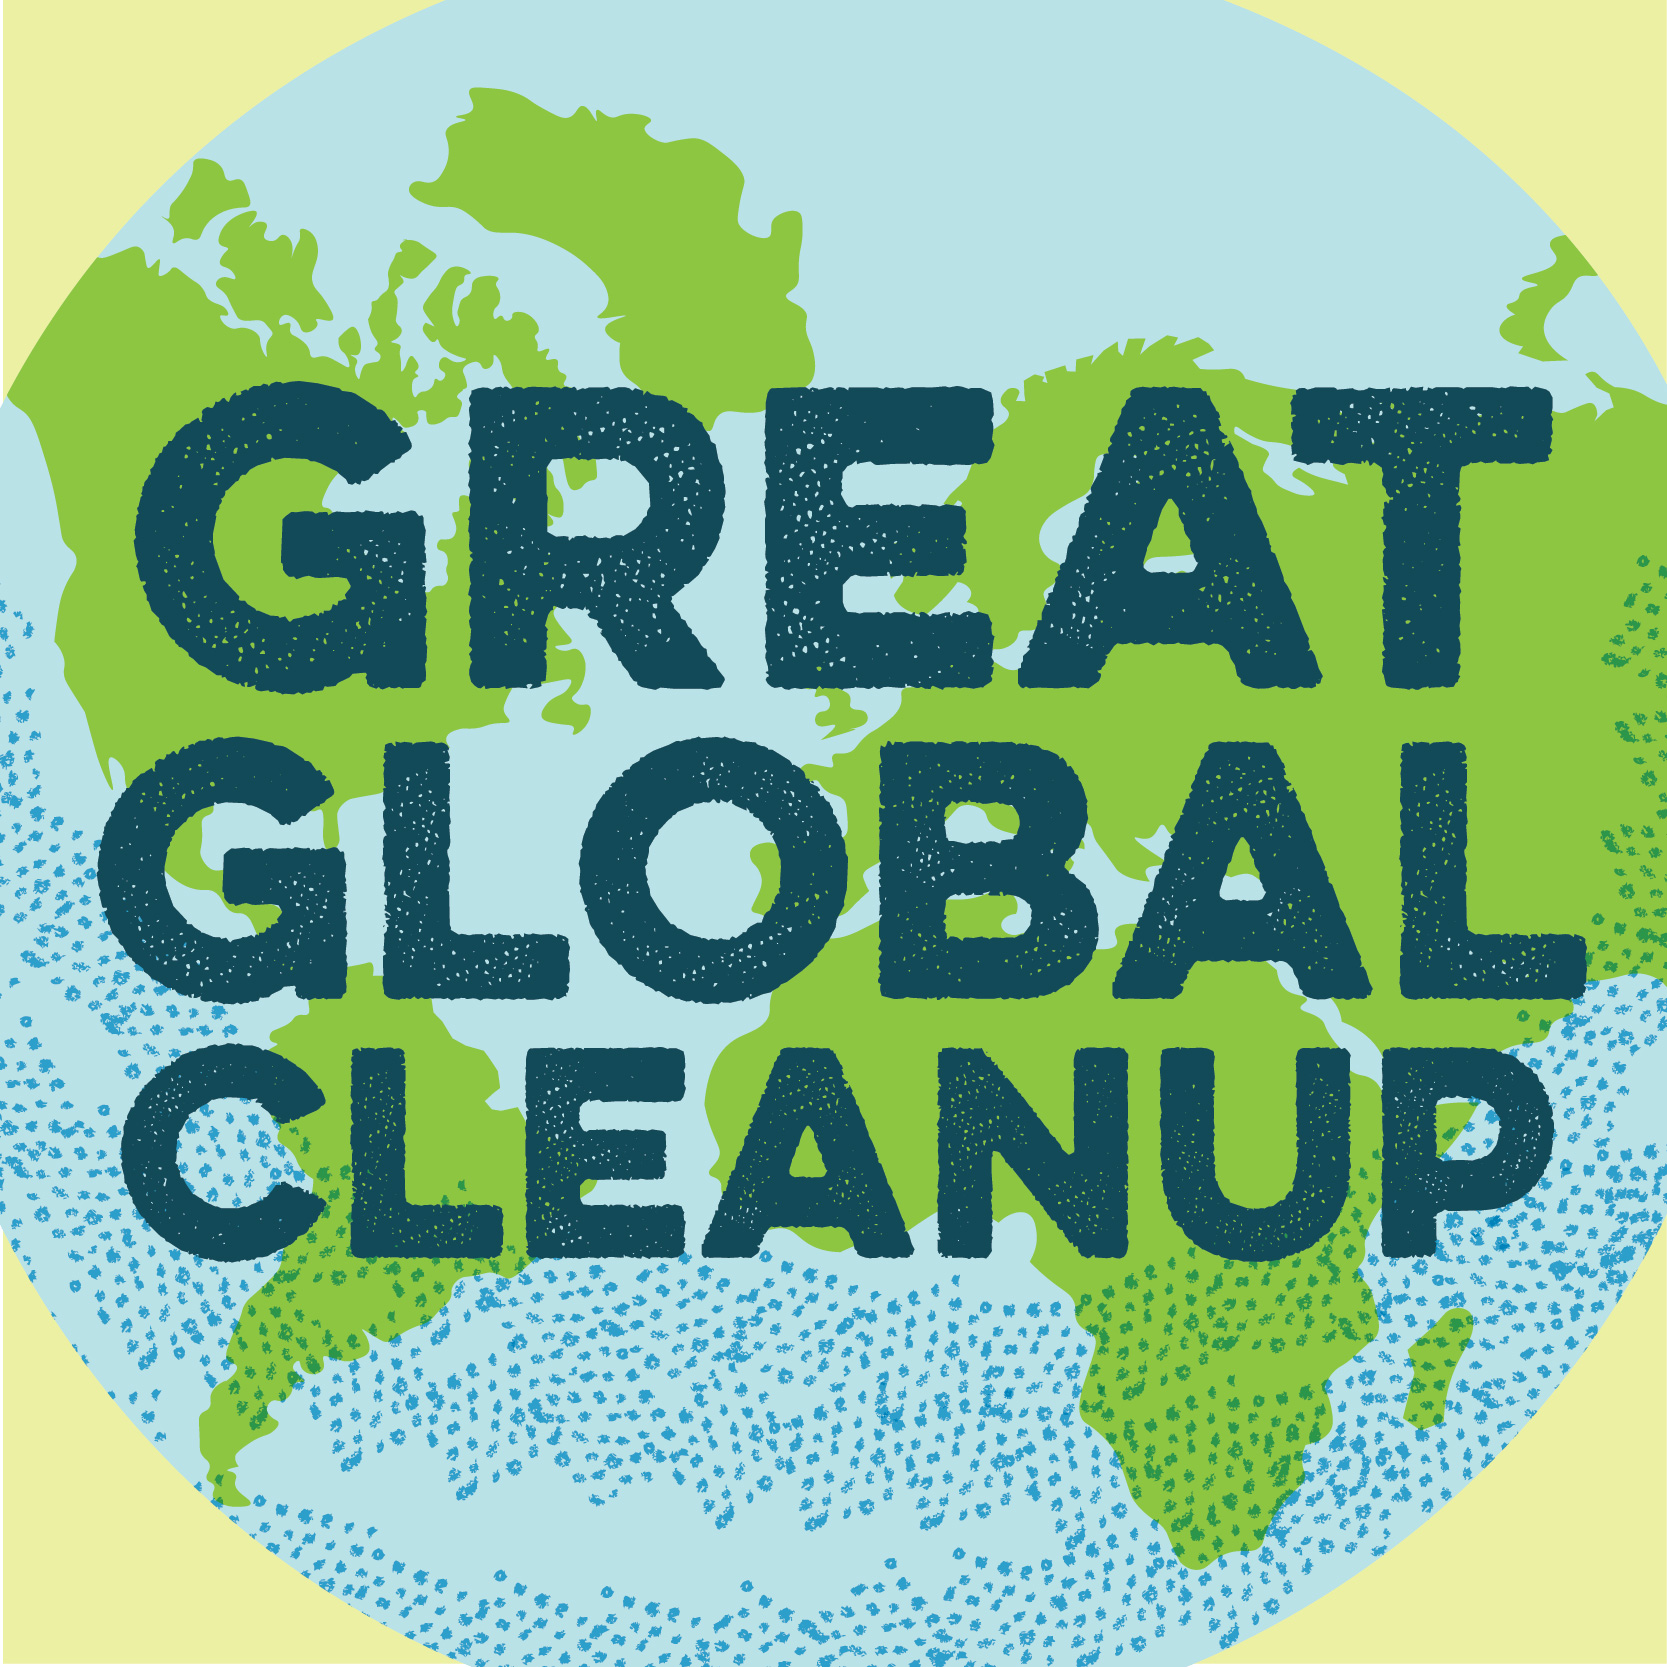 Great Global Cleanup